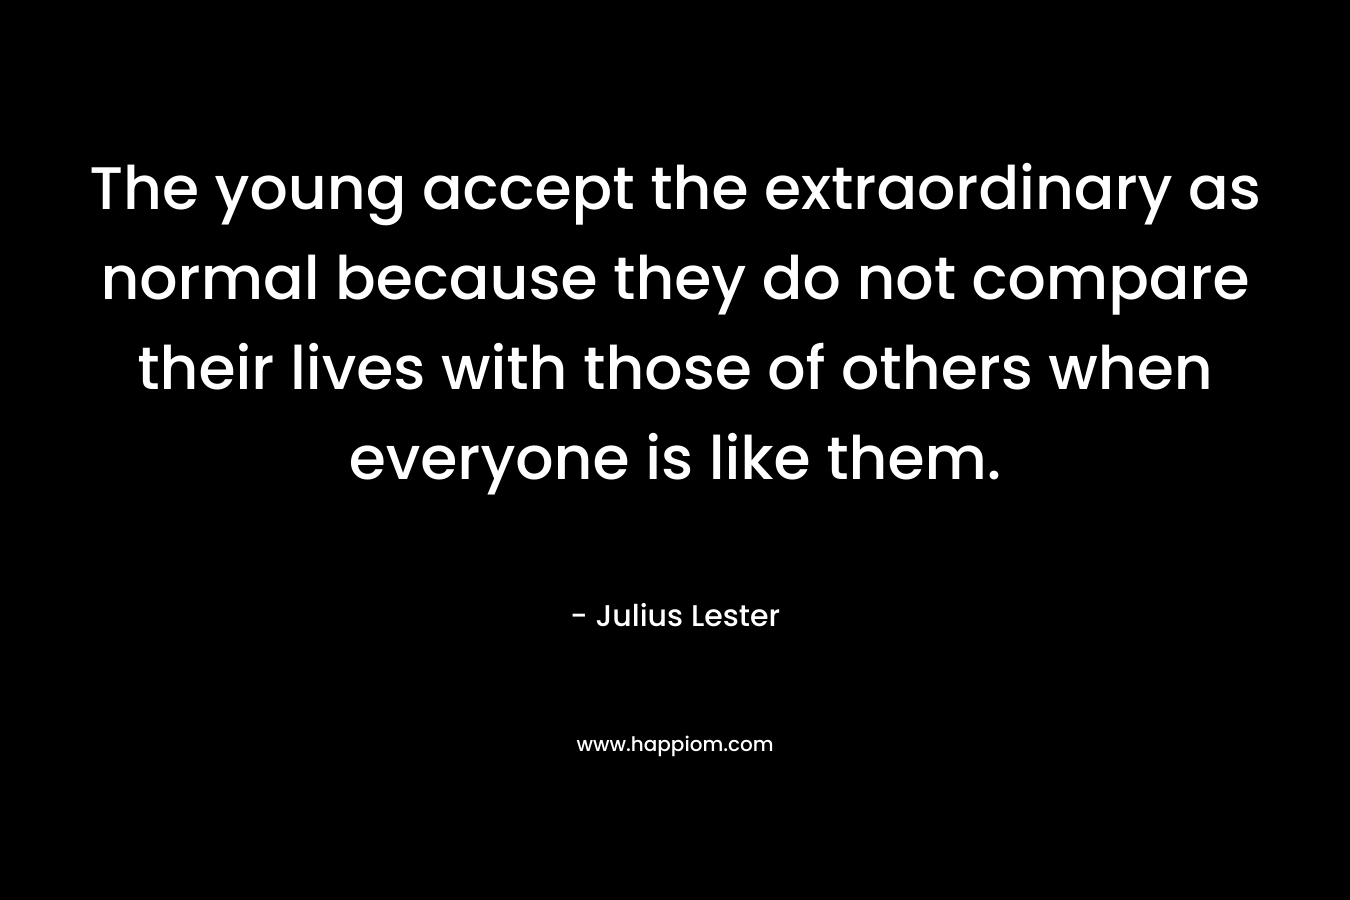 The young accept the extraordinary as normal because they do not compare their lives with those of others when everyone is like them. – Julius Lester